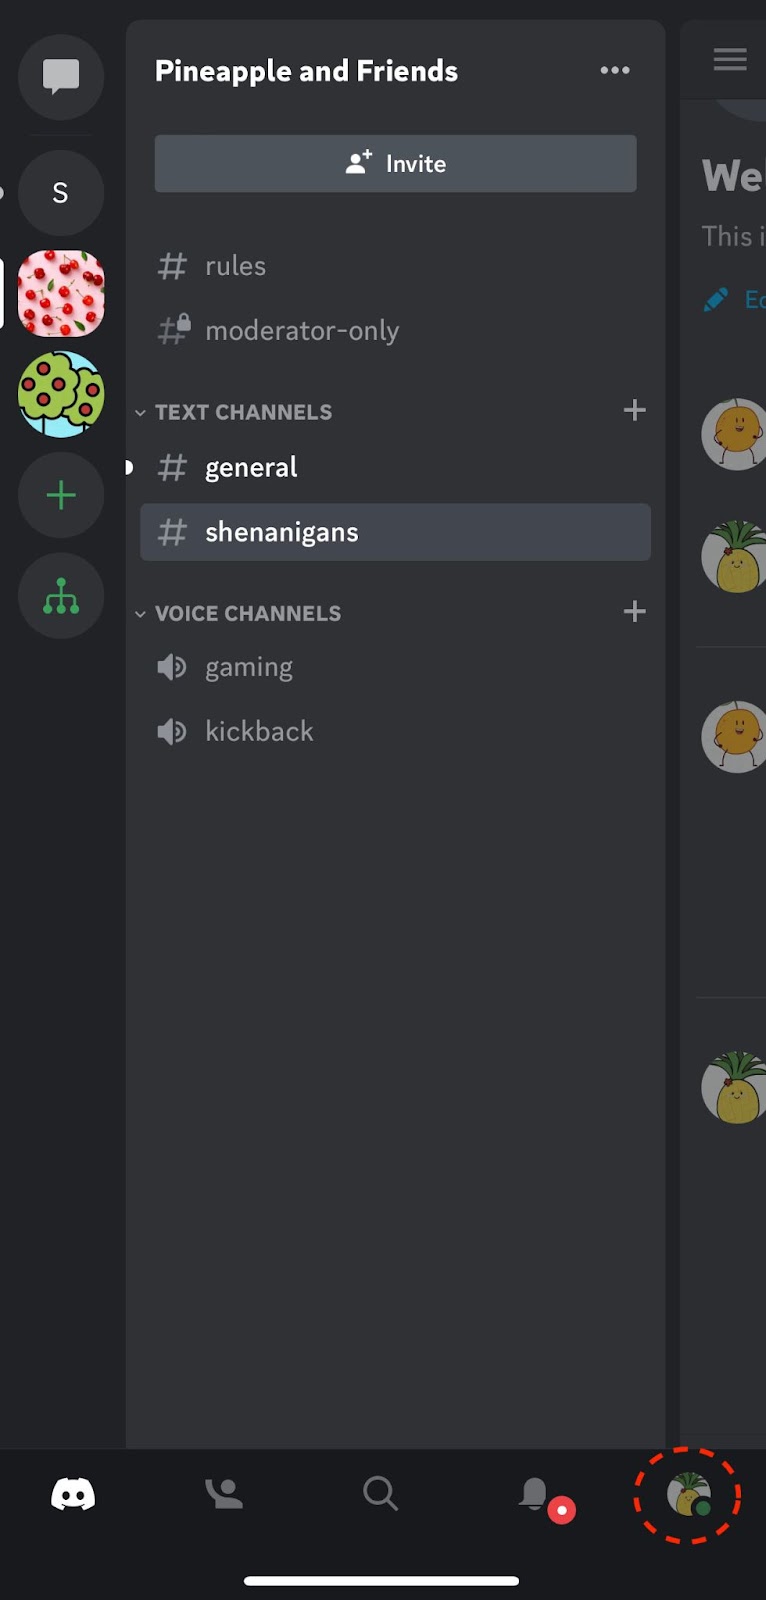 setup your discord server within 72 hours